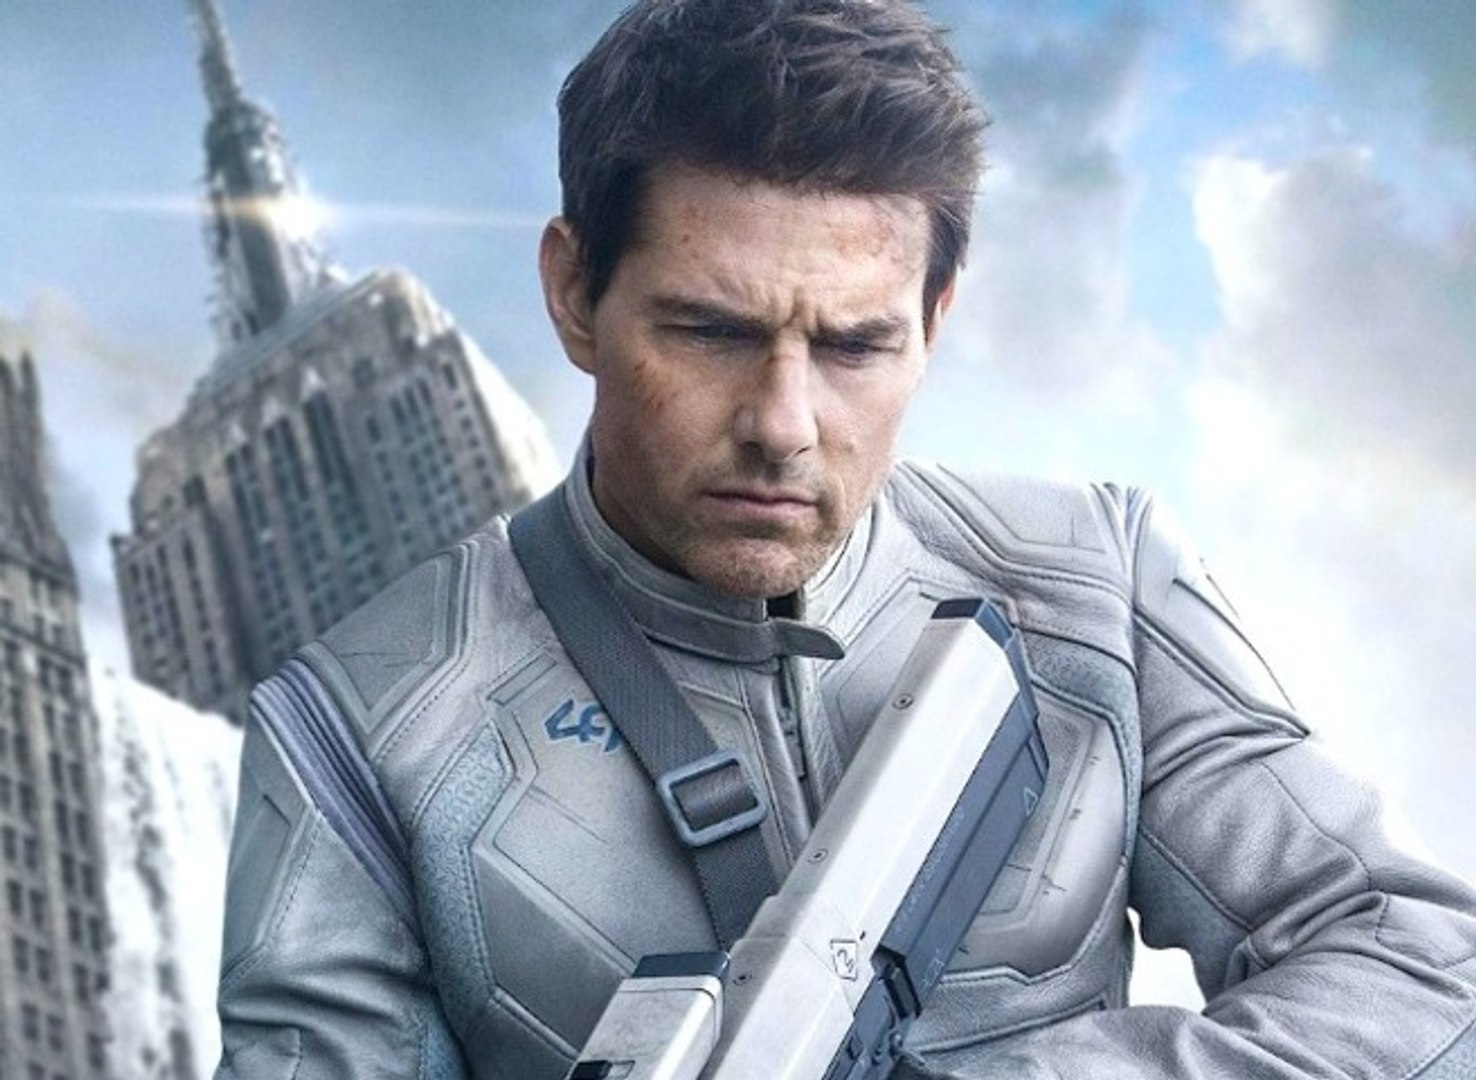 Oblivion with Tom Cruise - Theatrical Trailer - video Dailymotion